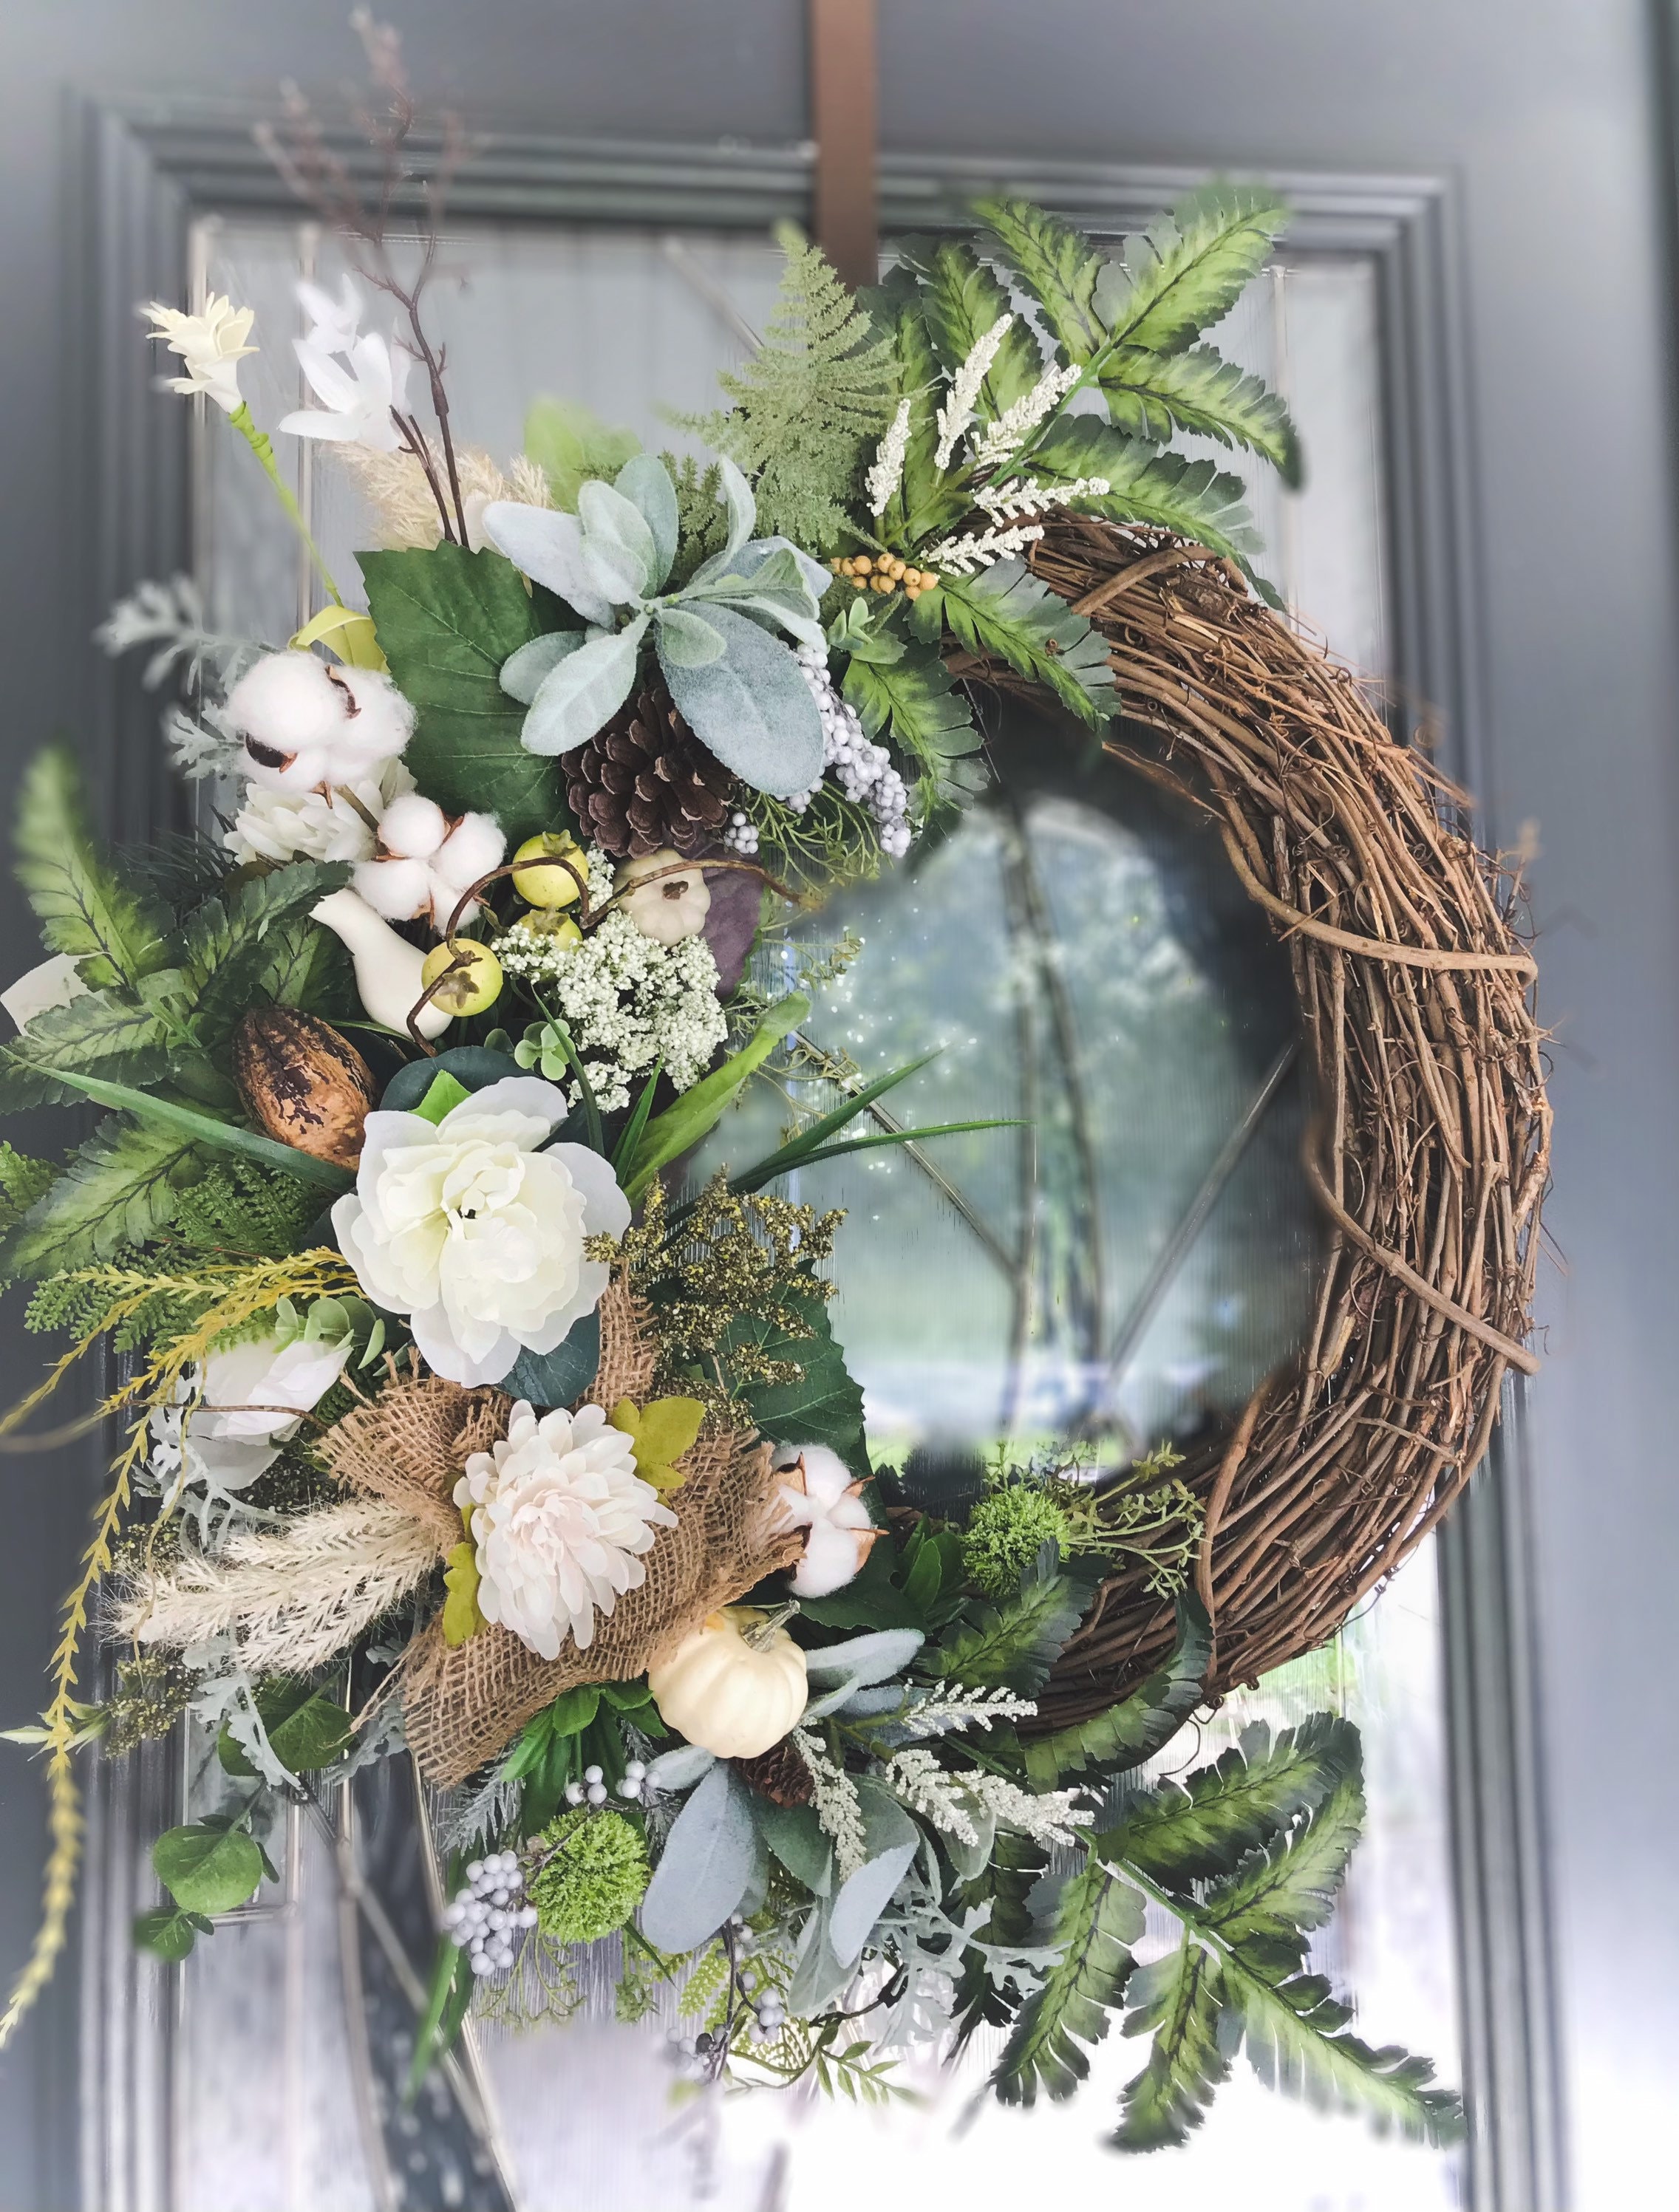 Wreath Pack Garland Cotton Farmhouse Wall Decor Window Glass Grapevine Garland Housewarming Gift Flower Garden Ideas in Front of House, Size: One Size